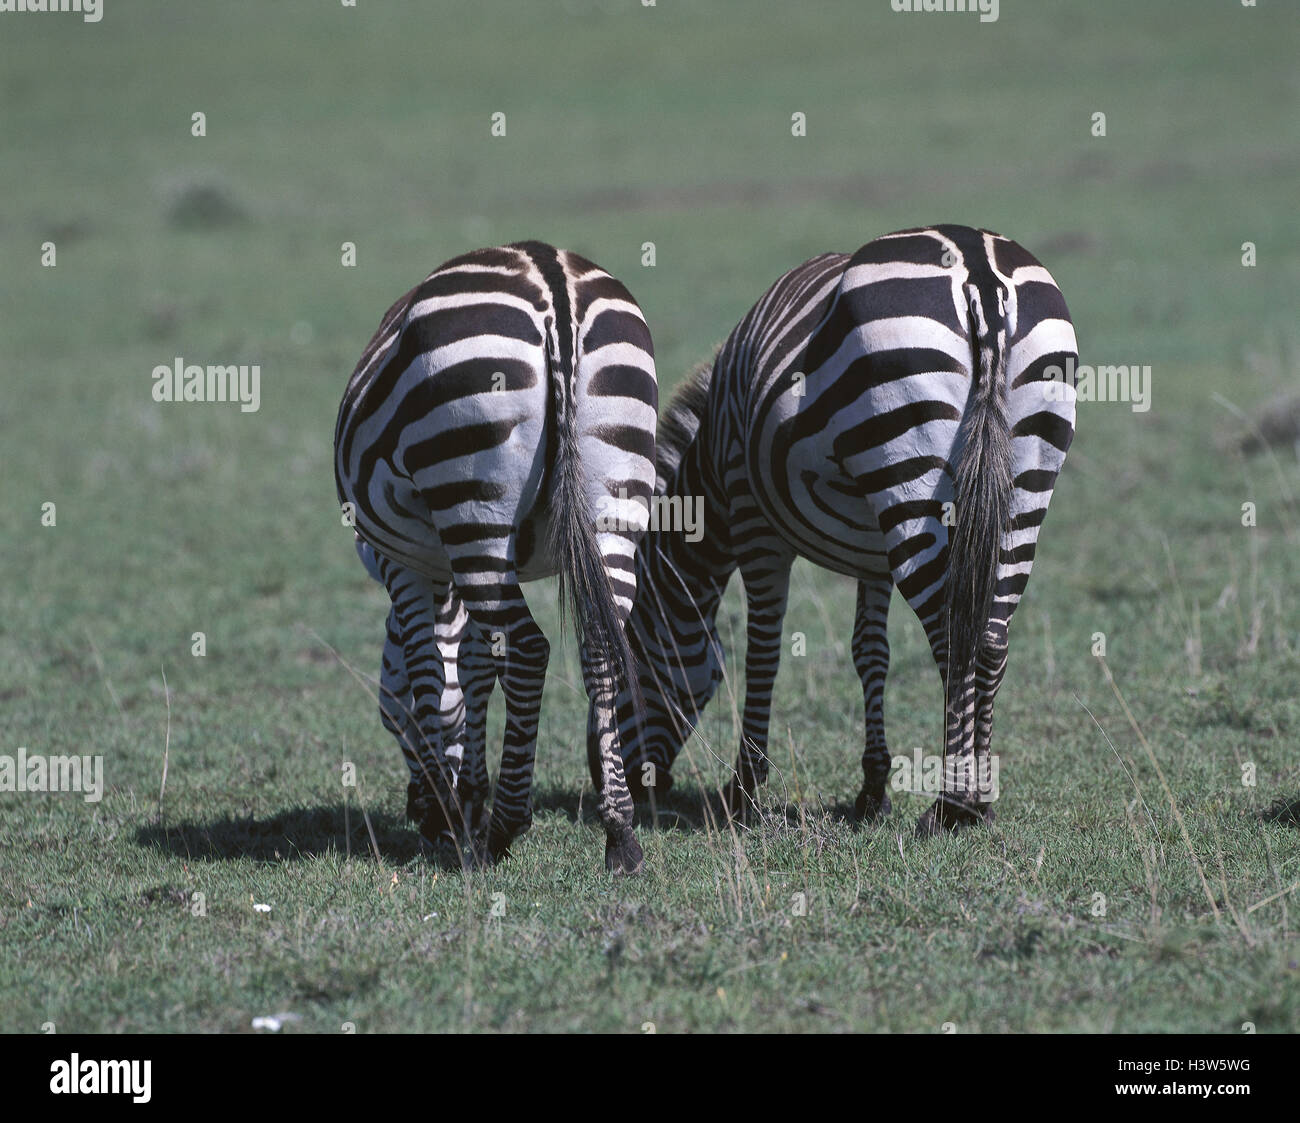 Böhm-steppe zebras, Equus quagga boehmi, back view, Africa, mammals, wild animals, uncloven-hoofed animals, Equidae, steppe zebras, zebras, two, black-and-white, touched, put out to pasture, graze, meadow, outside Stock Photo